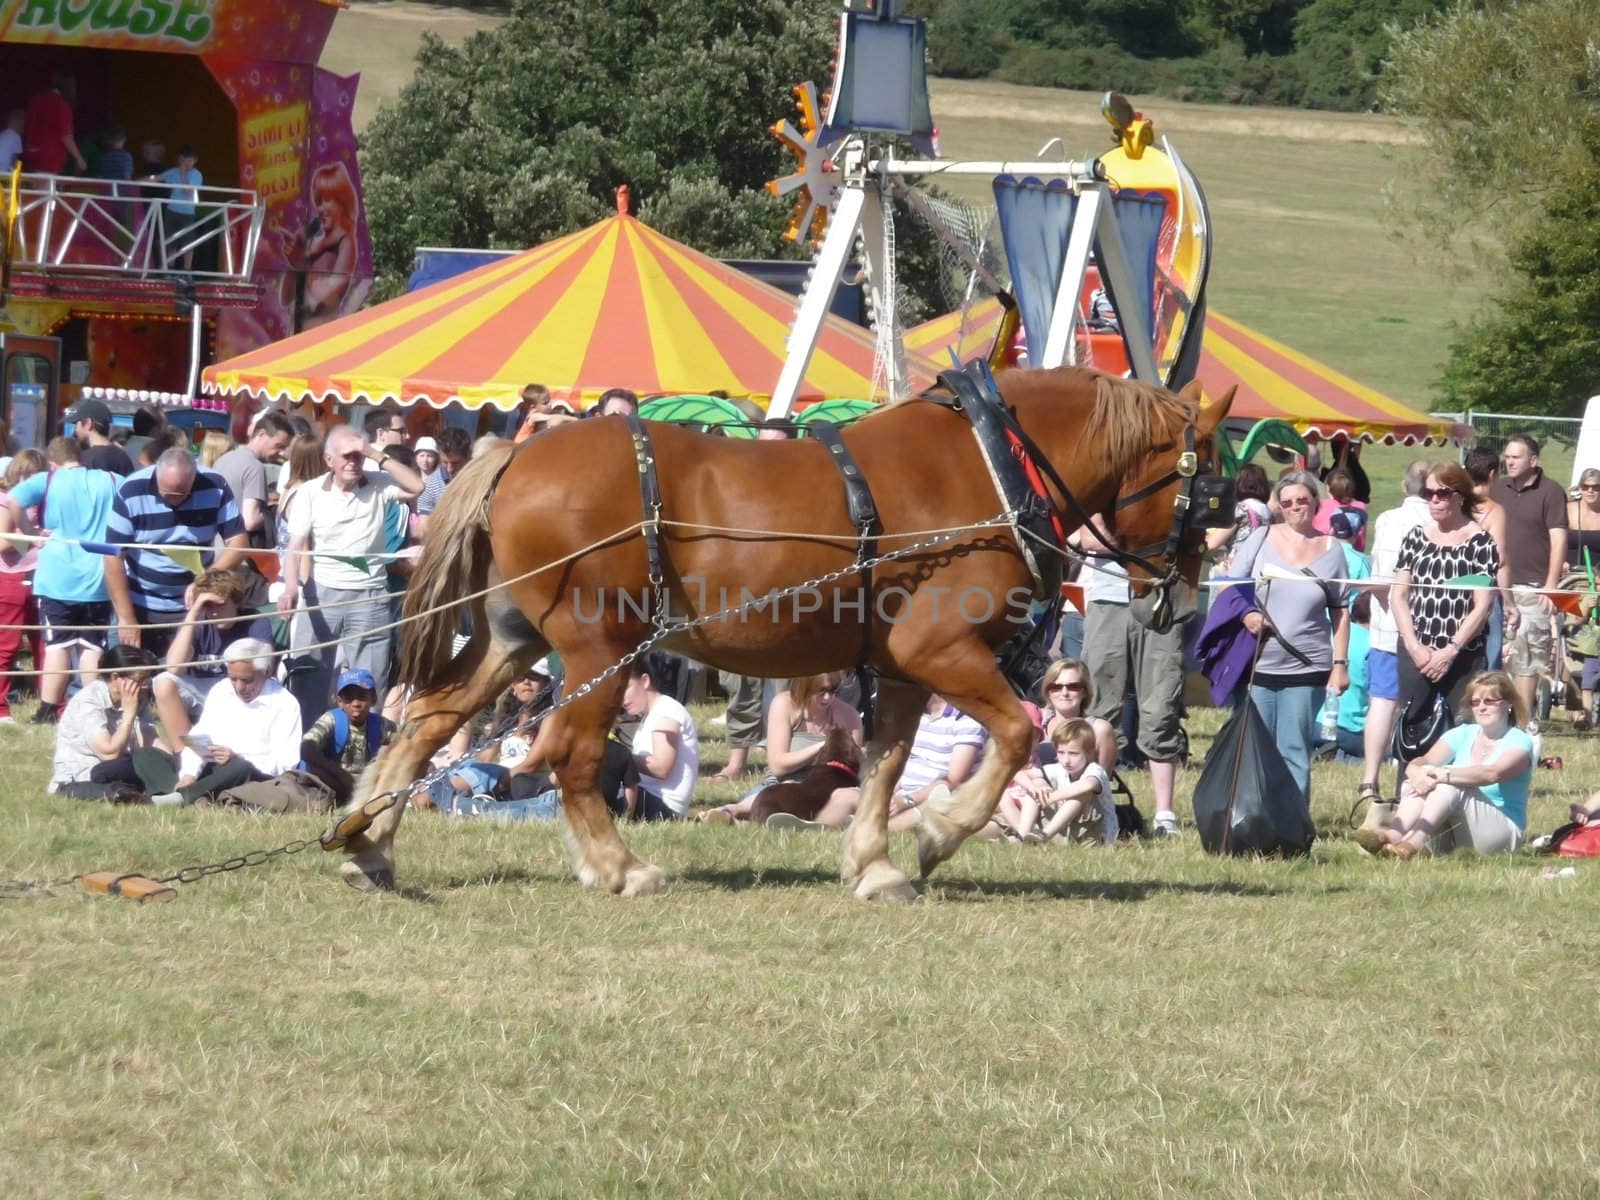 Hainault - August 31: Suffolk Punch Heavy Horse at Hainault forest summer family show August 31st, 2009 in Hainault. 